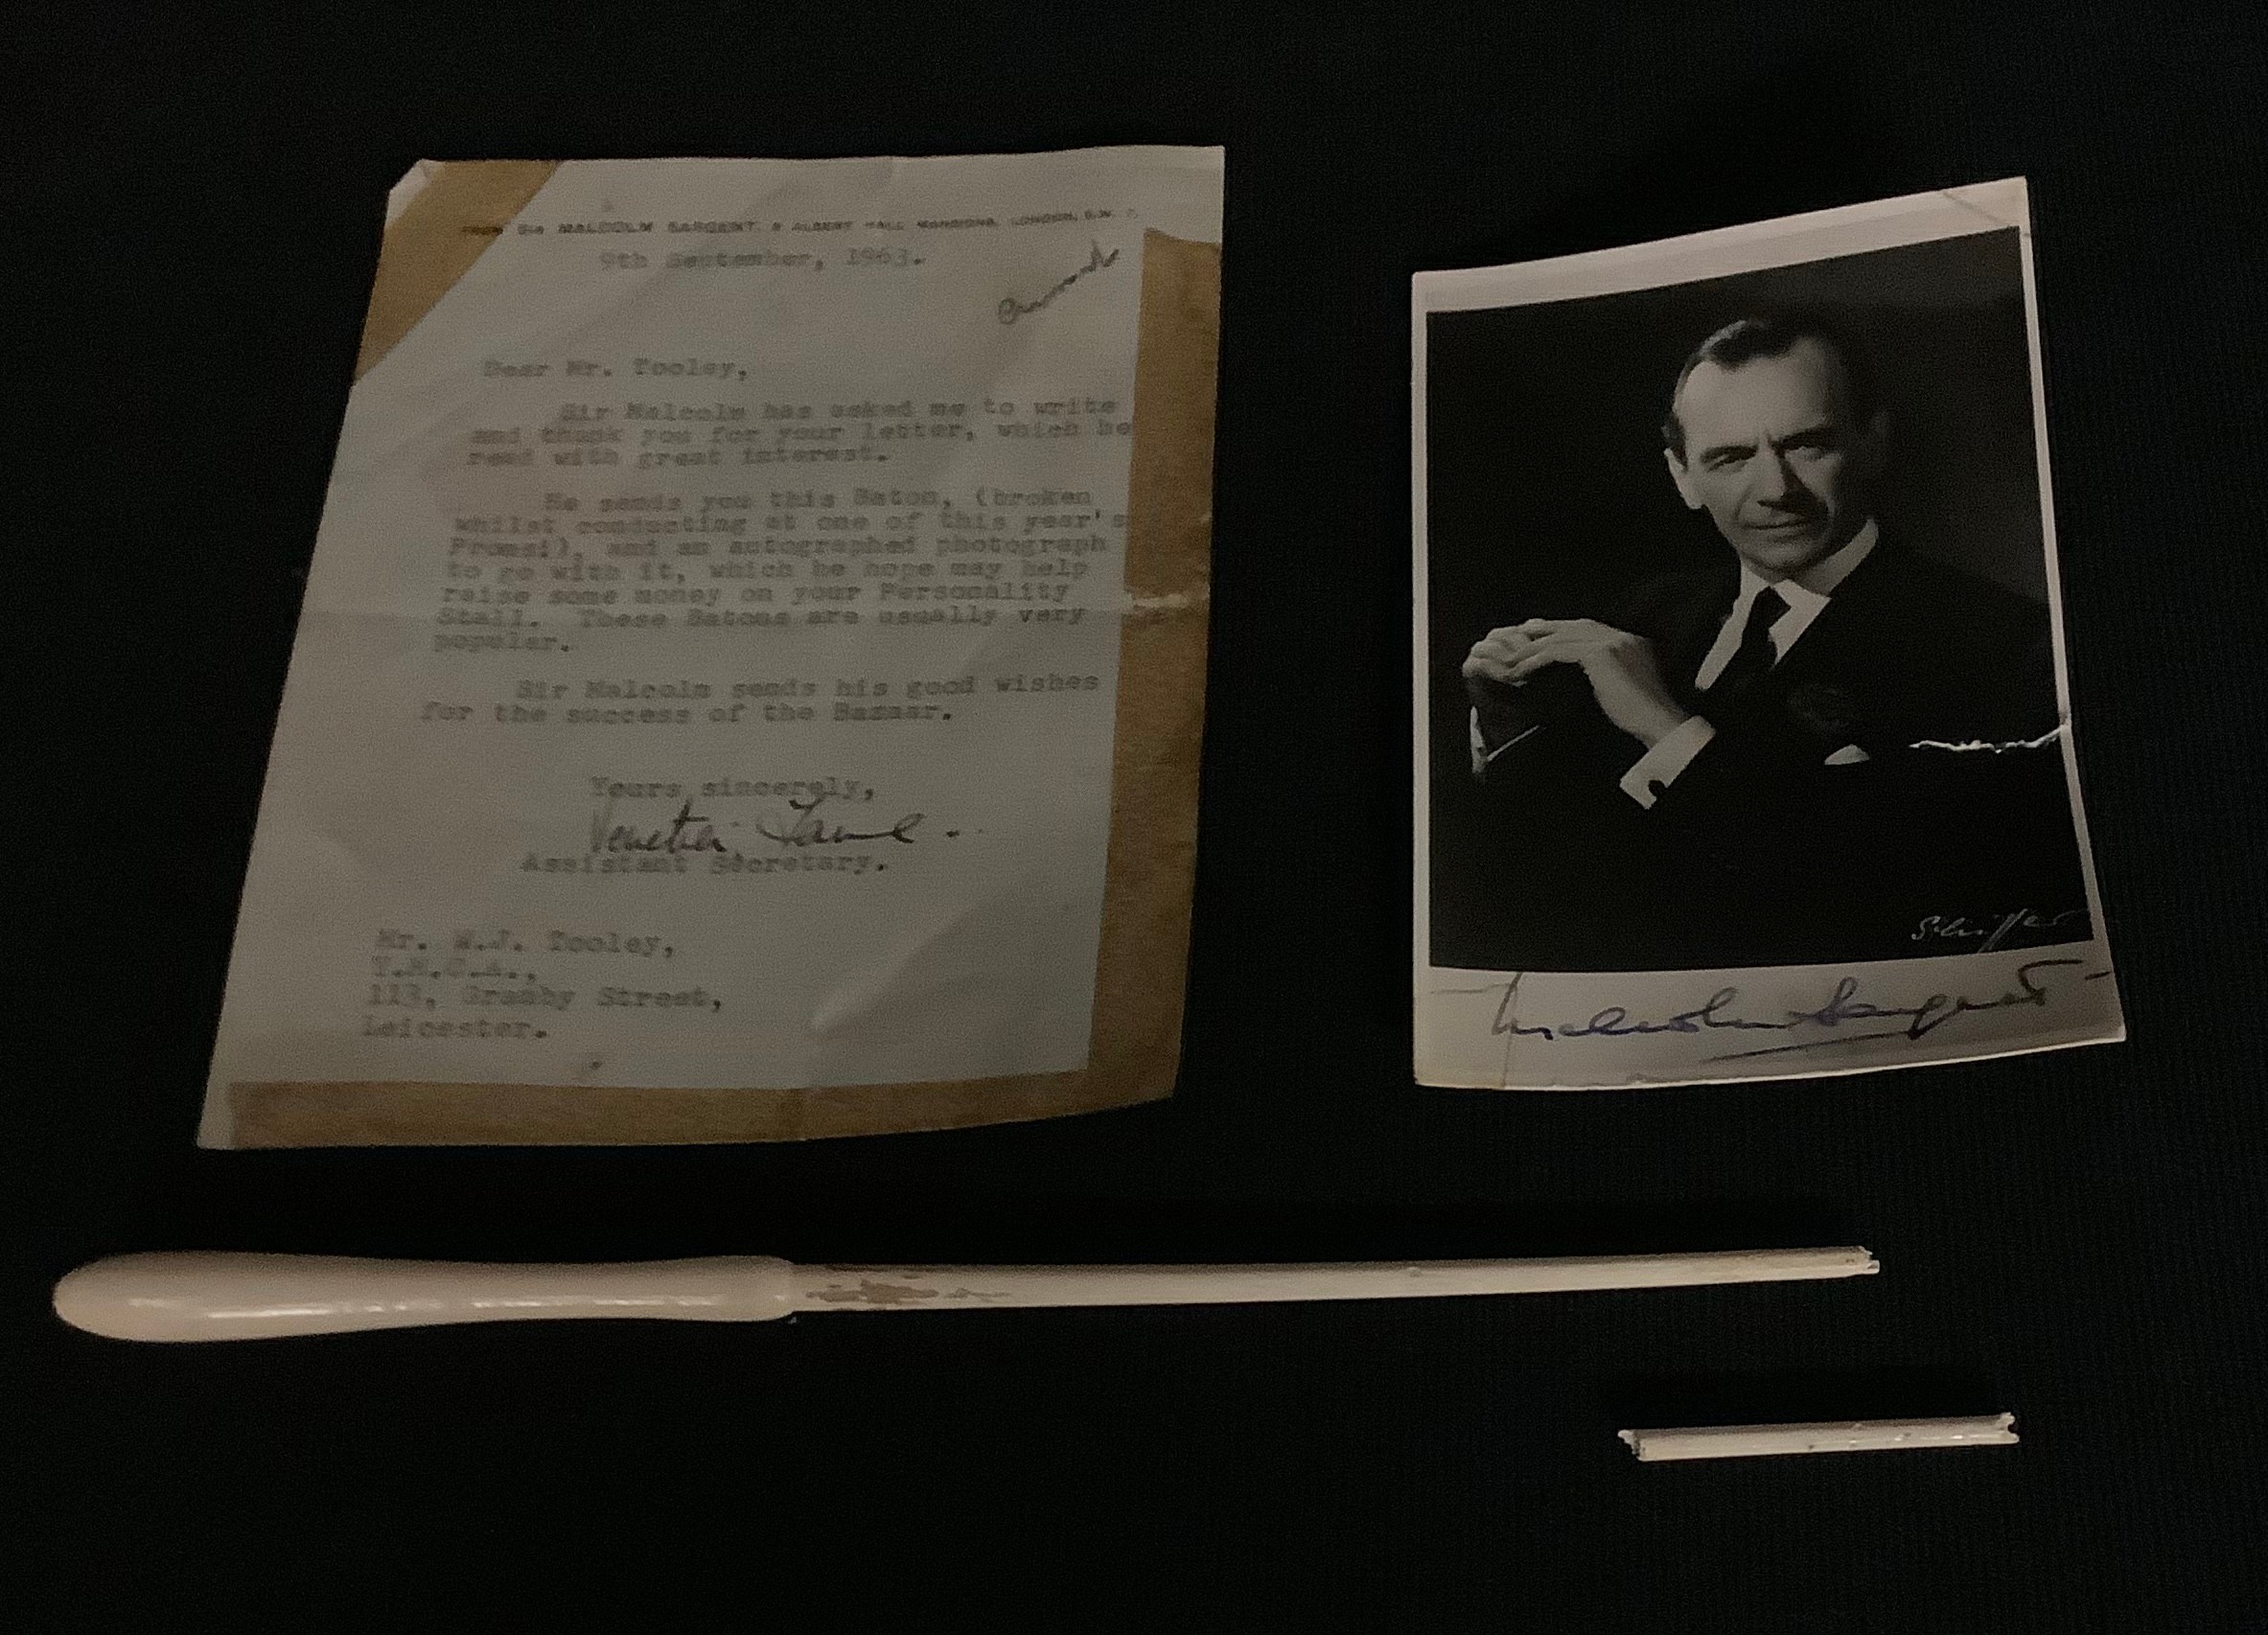 Sir Malcolm Sargent - The Proms, a white painted baton used by Sir Malcolm Sargent to conduct the